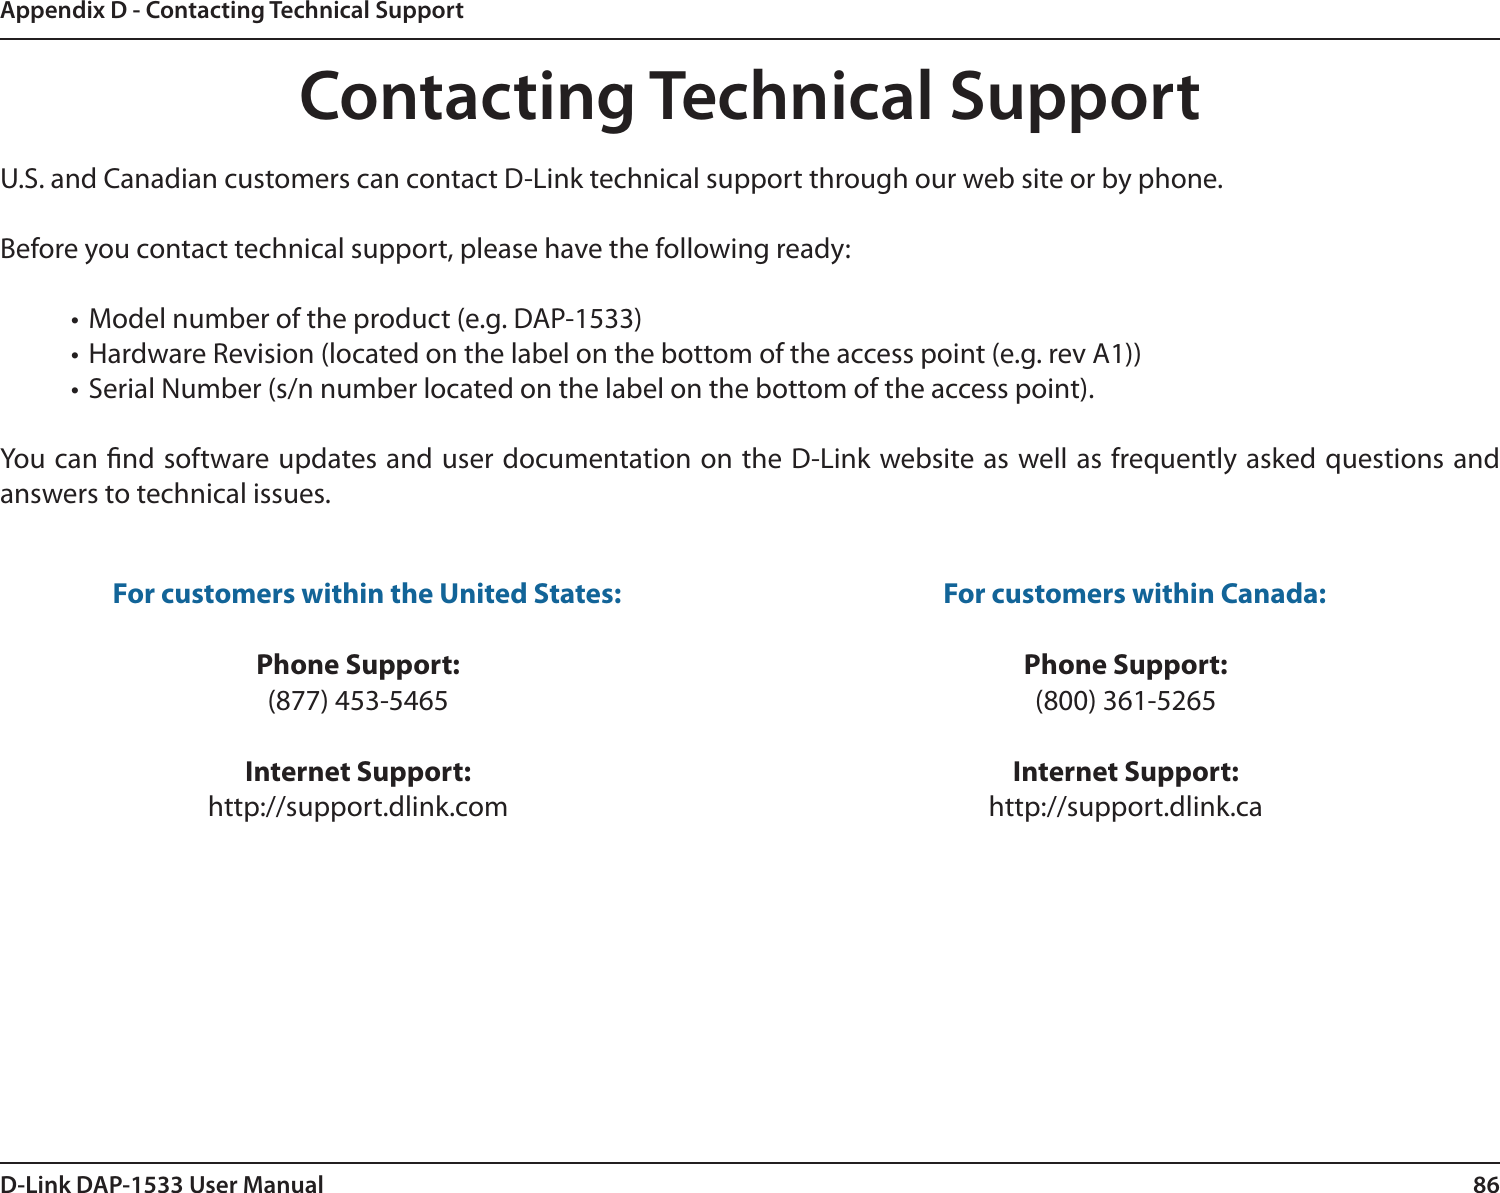 86D-Link DAP-1533 User ManualAppendix D - Contacting Technical SupportContacting Technical SupportU.S. and Canadian customers can contact D-Link technical support through our web site or by phone.Before you contact technical support, please have the following ready:• Model number of the product (e.g. DAP-1533)• Hardware Revision (located on the label on the bottom of the access point (e.g. rev A1))• Serial Number (s/n number located on the label on the bottom of the access point). You can nd software updates and user documentation on the D-Link website as well as frequently asked questions and answers to technical issues.For customers within the United States: Phone Support:(877) 453-5465Internet Support:http://support.dlink.com For customers within Canada: Phone Support:(800) 361-5265 Internet Support:http://support.dlink.ca